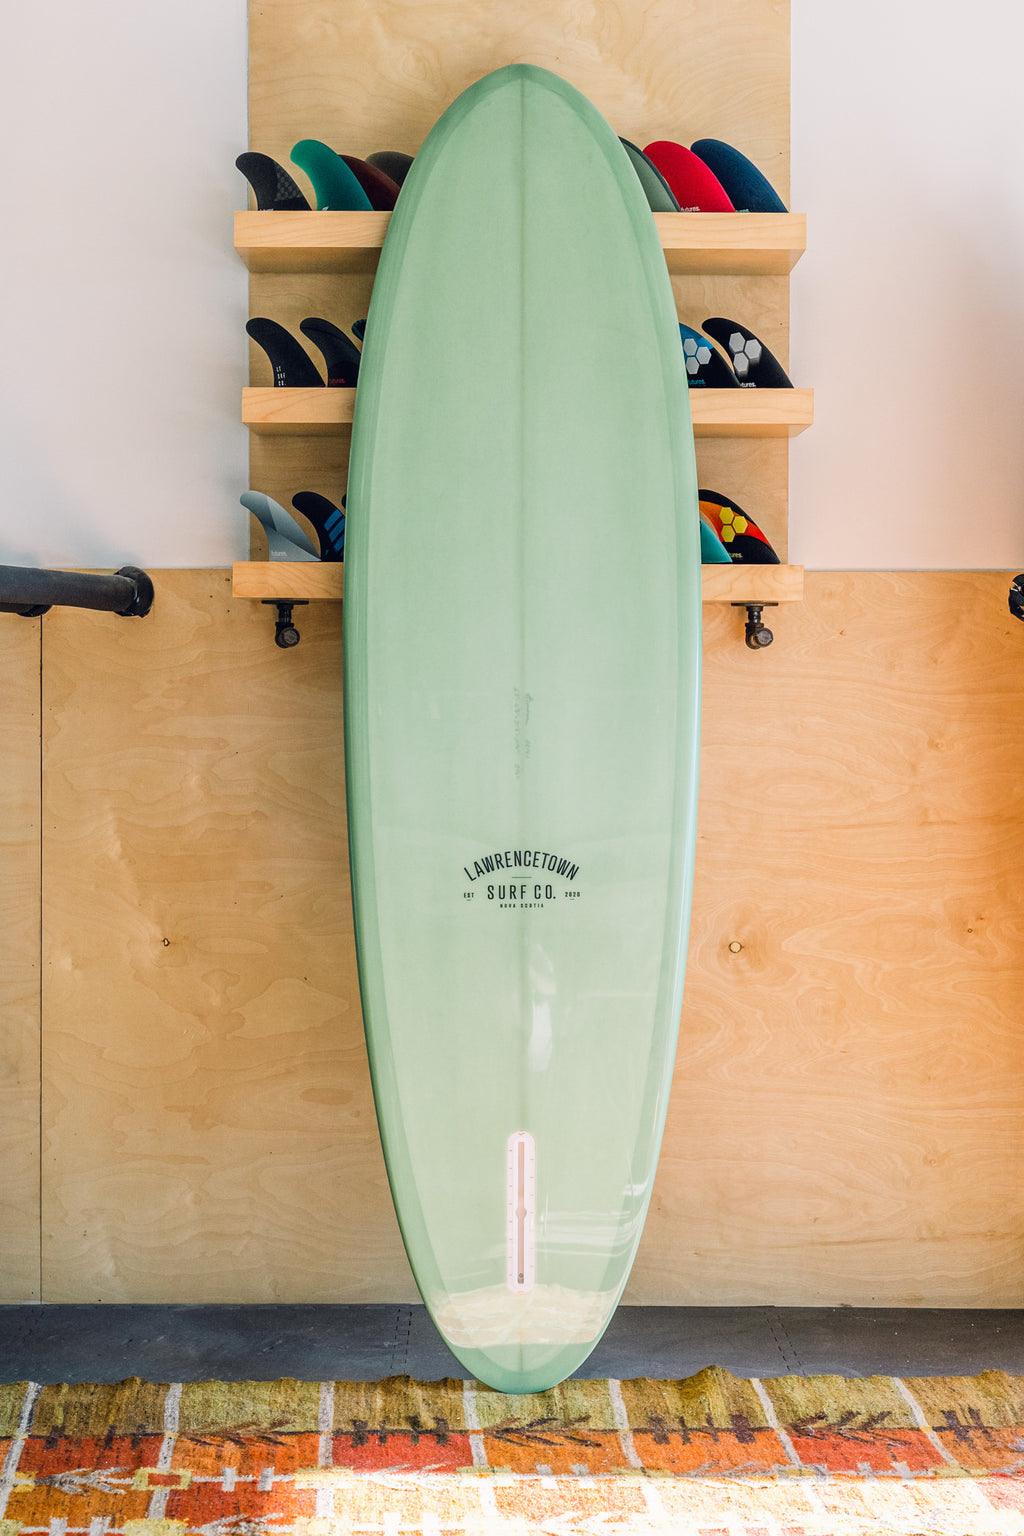 Lawrencetown Surf Co. - 6'8 Classic Egg